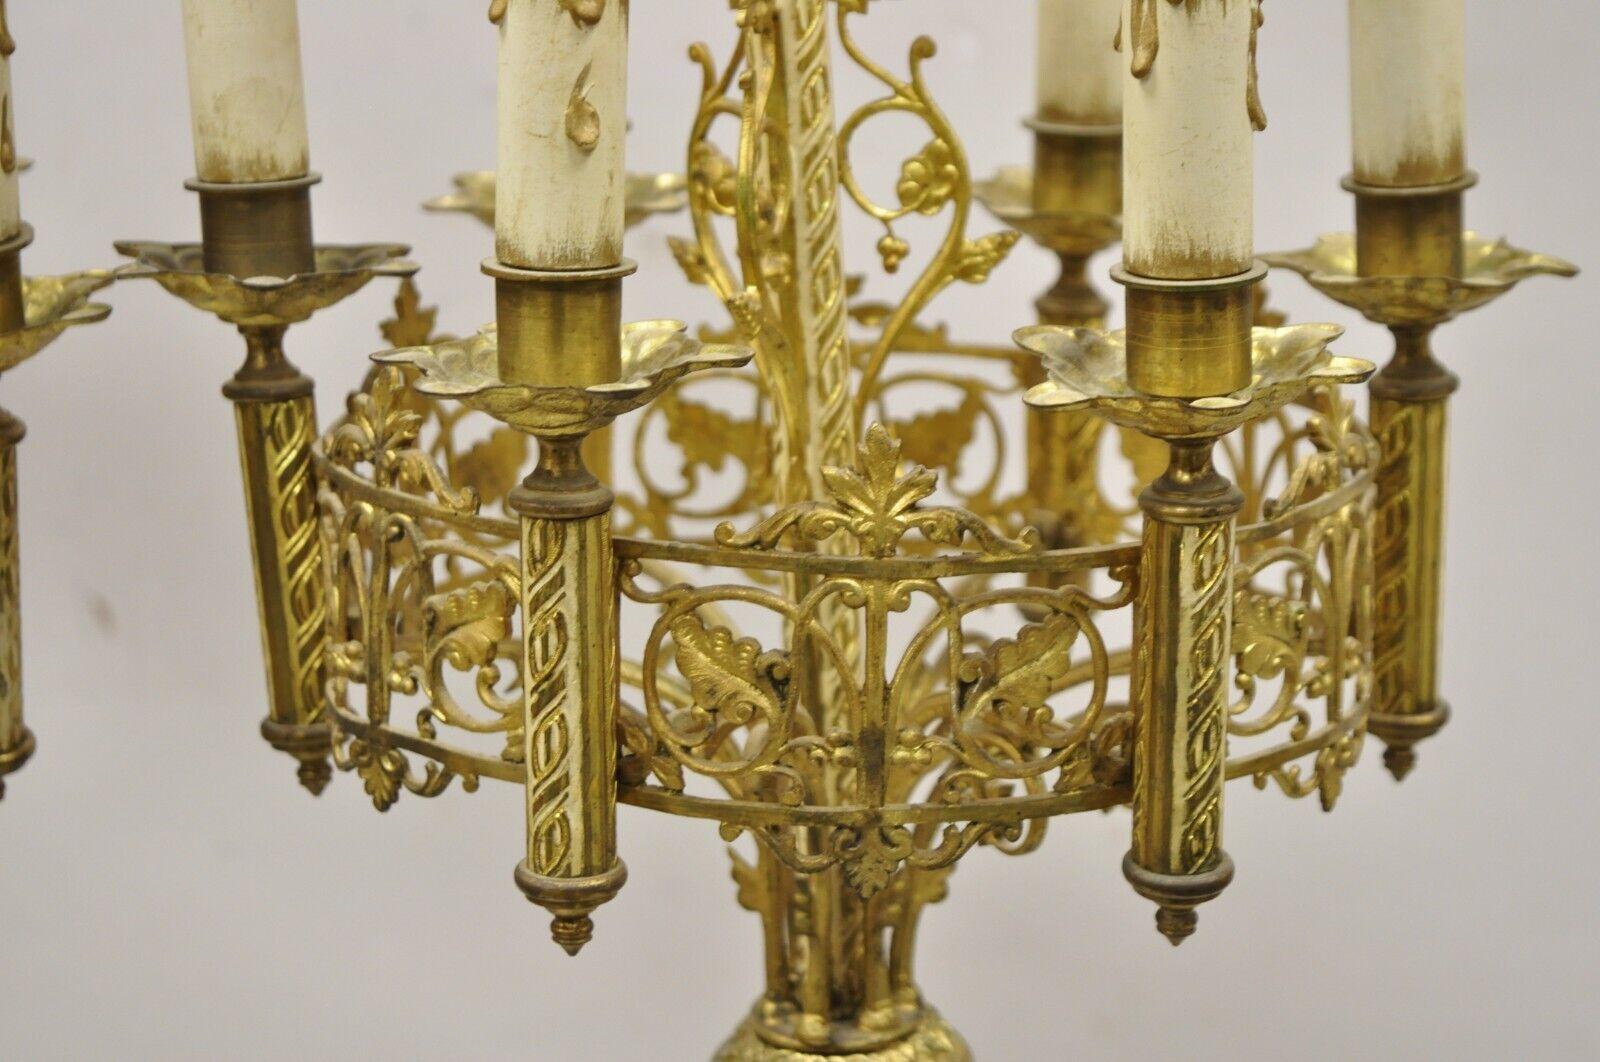 Antique Gothic Revival Gold Bronze Figural Candelabra Table Lamps, a Pair For Sale 1